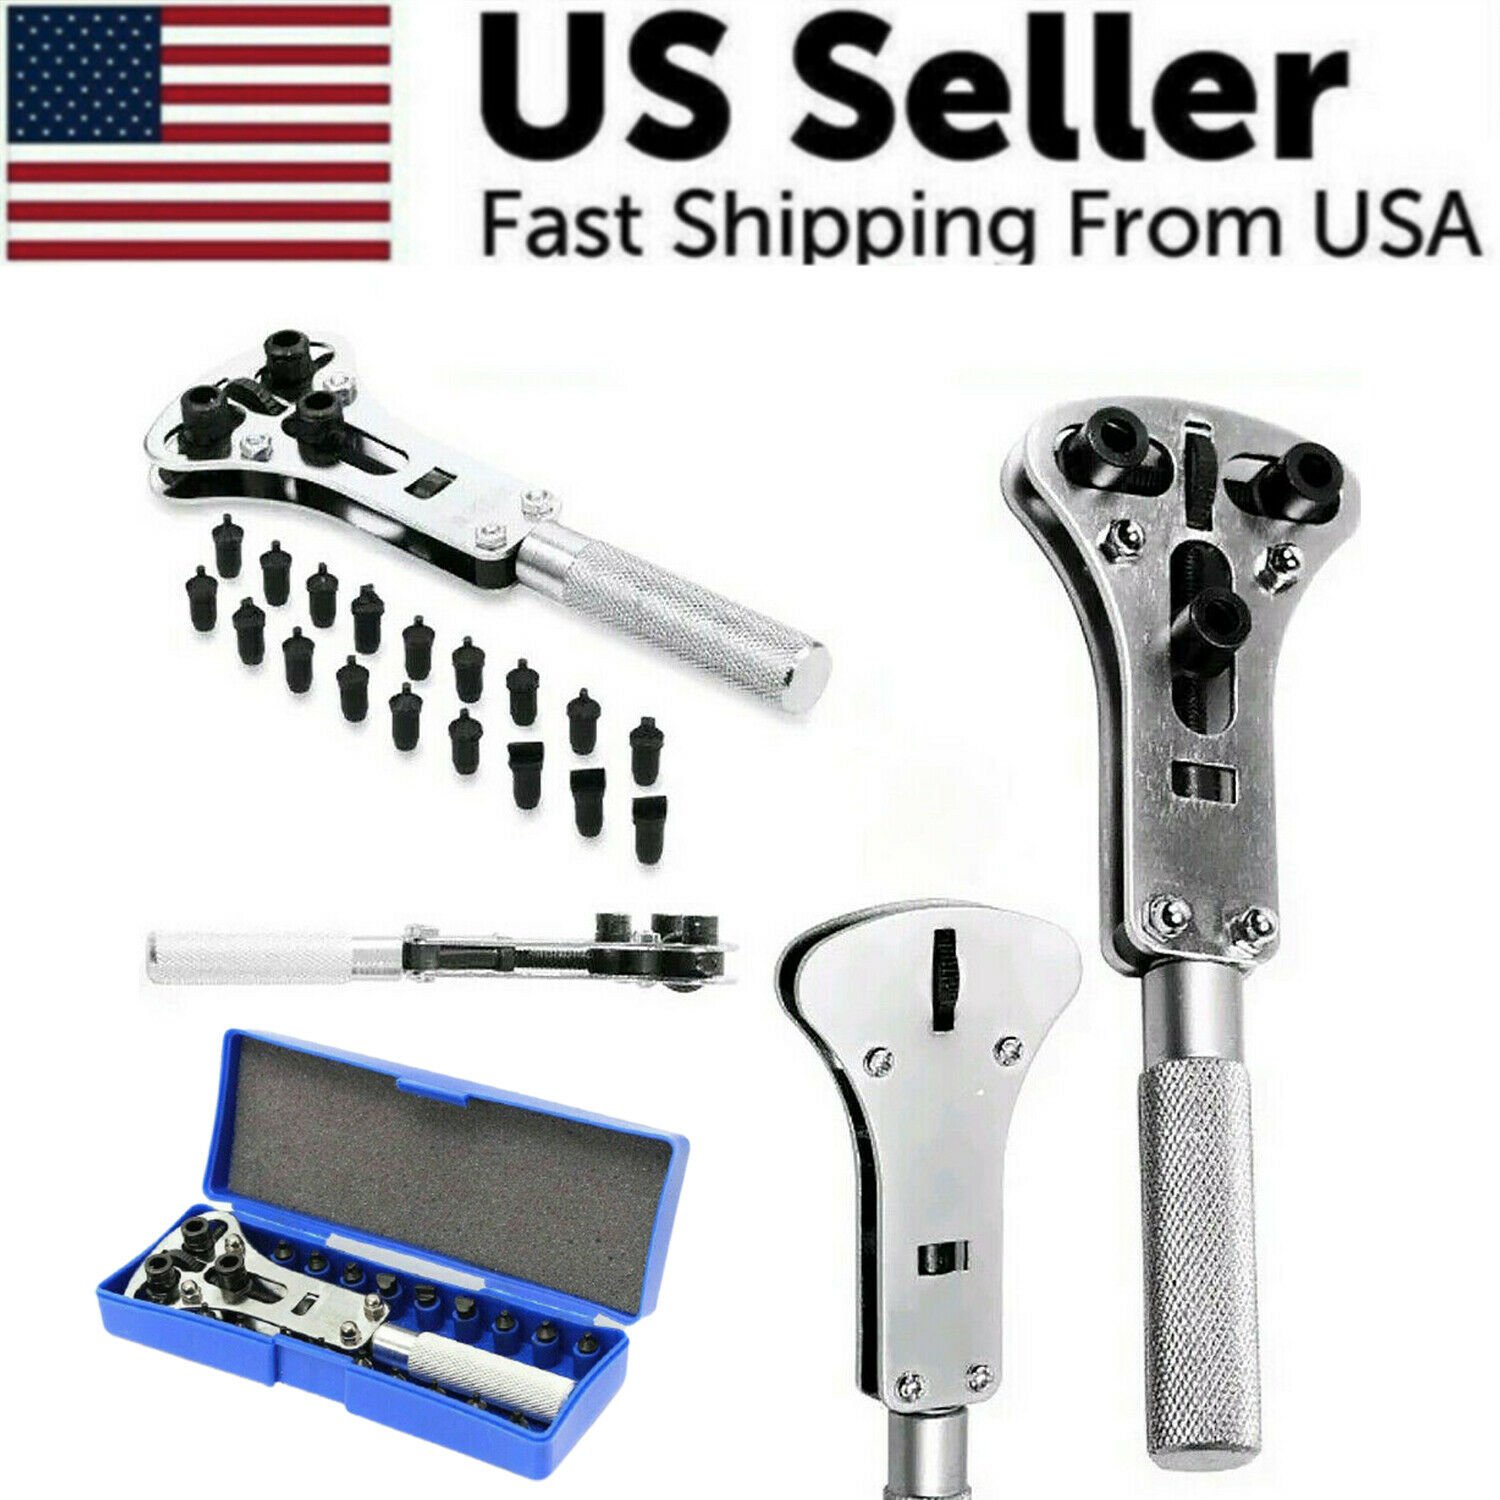 Watch Band Back Case OPENER Fixer Repair Tool Kit Battery Screw Cover Remover